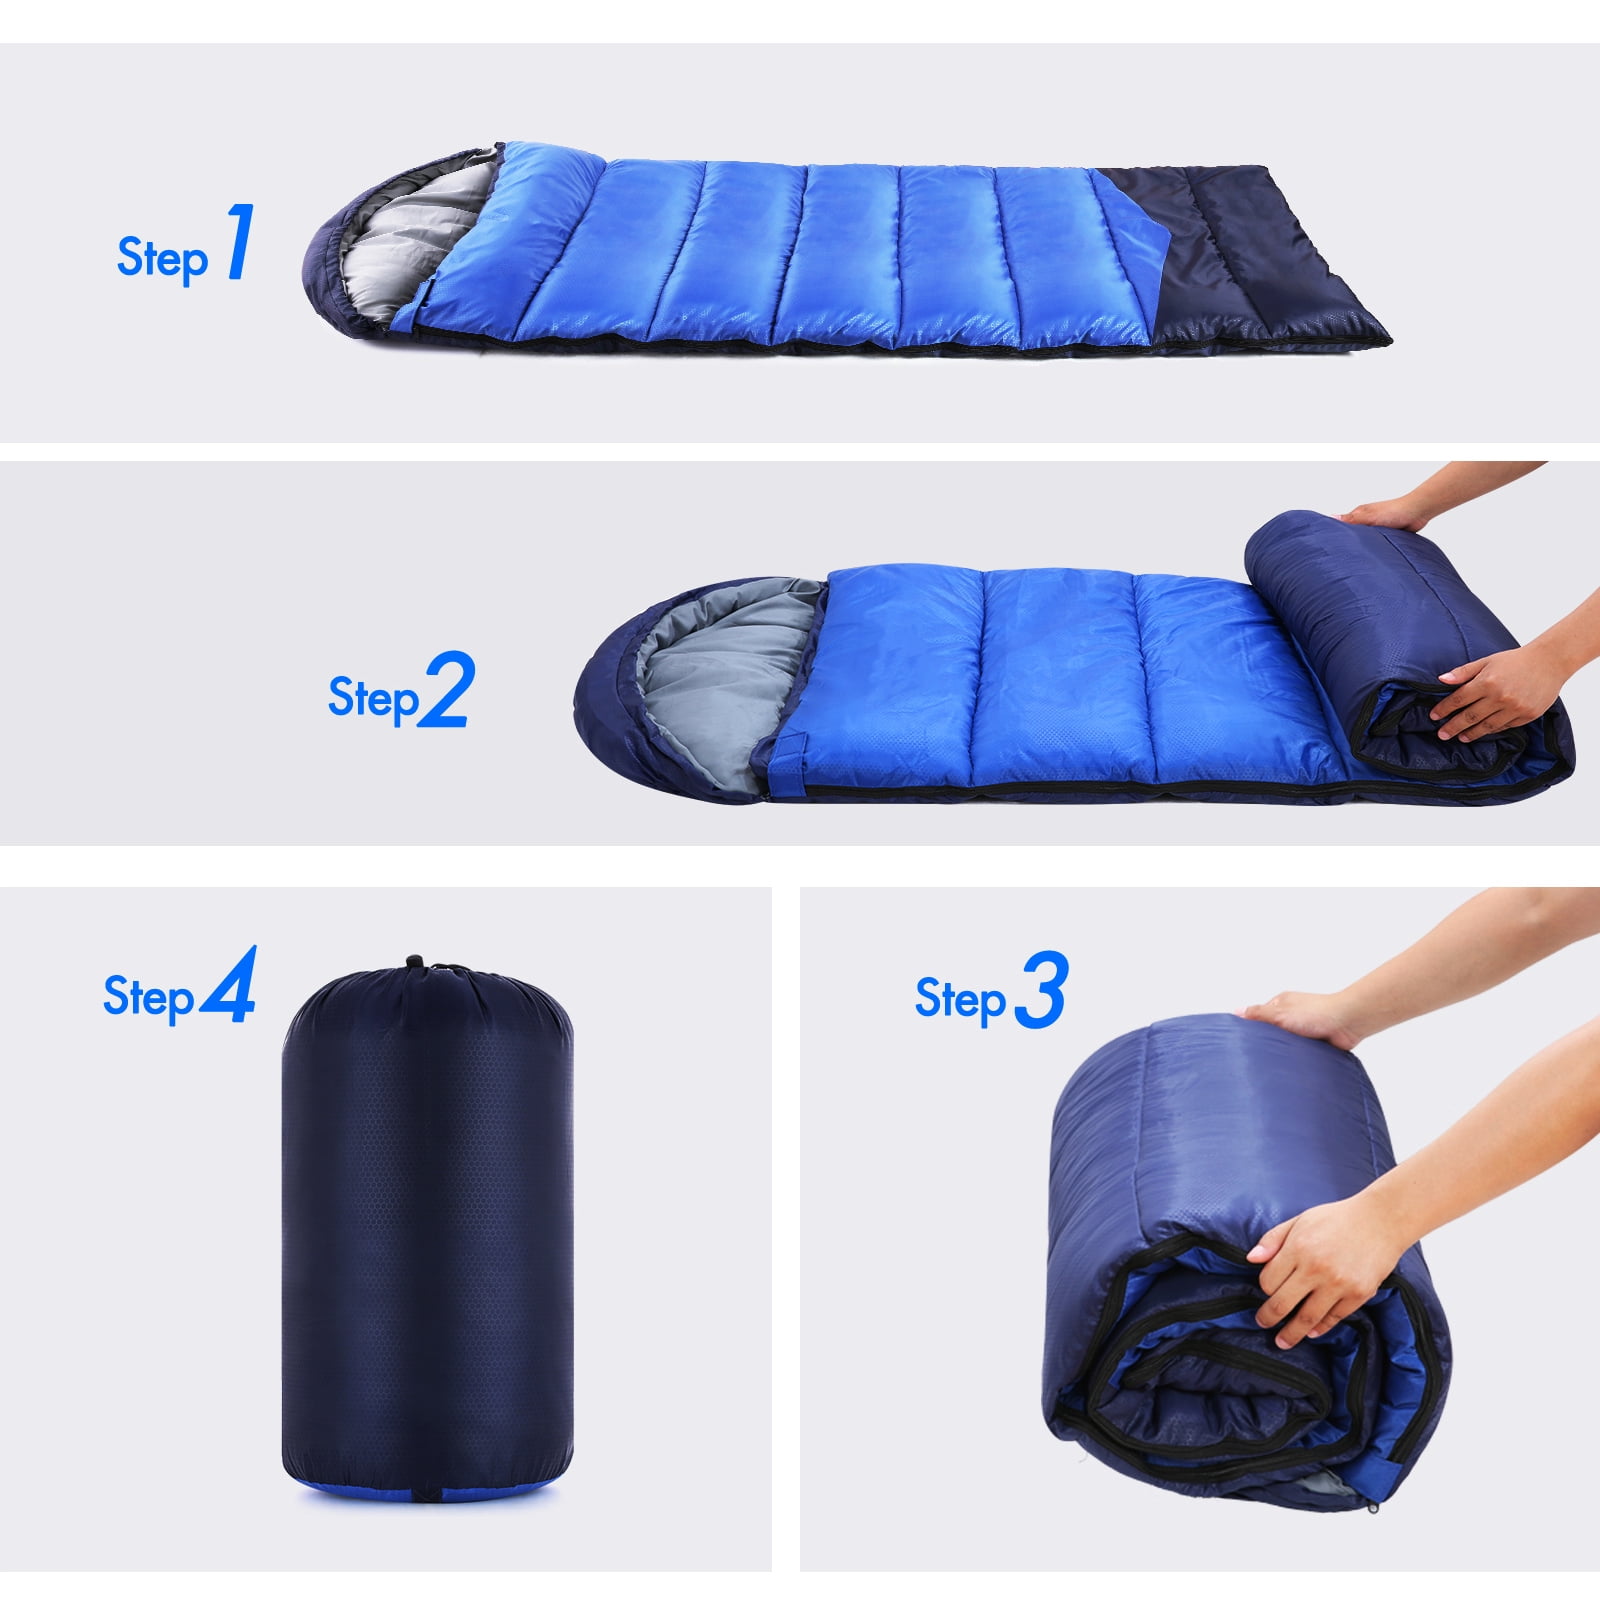 Mummy Sleeping Bags for Adults 0 Degrees High Silk India  Ubuy